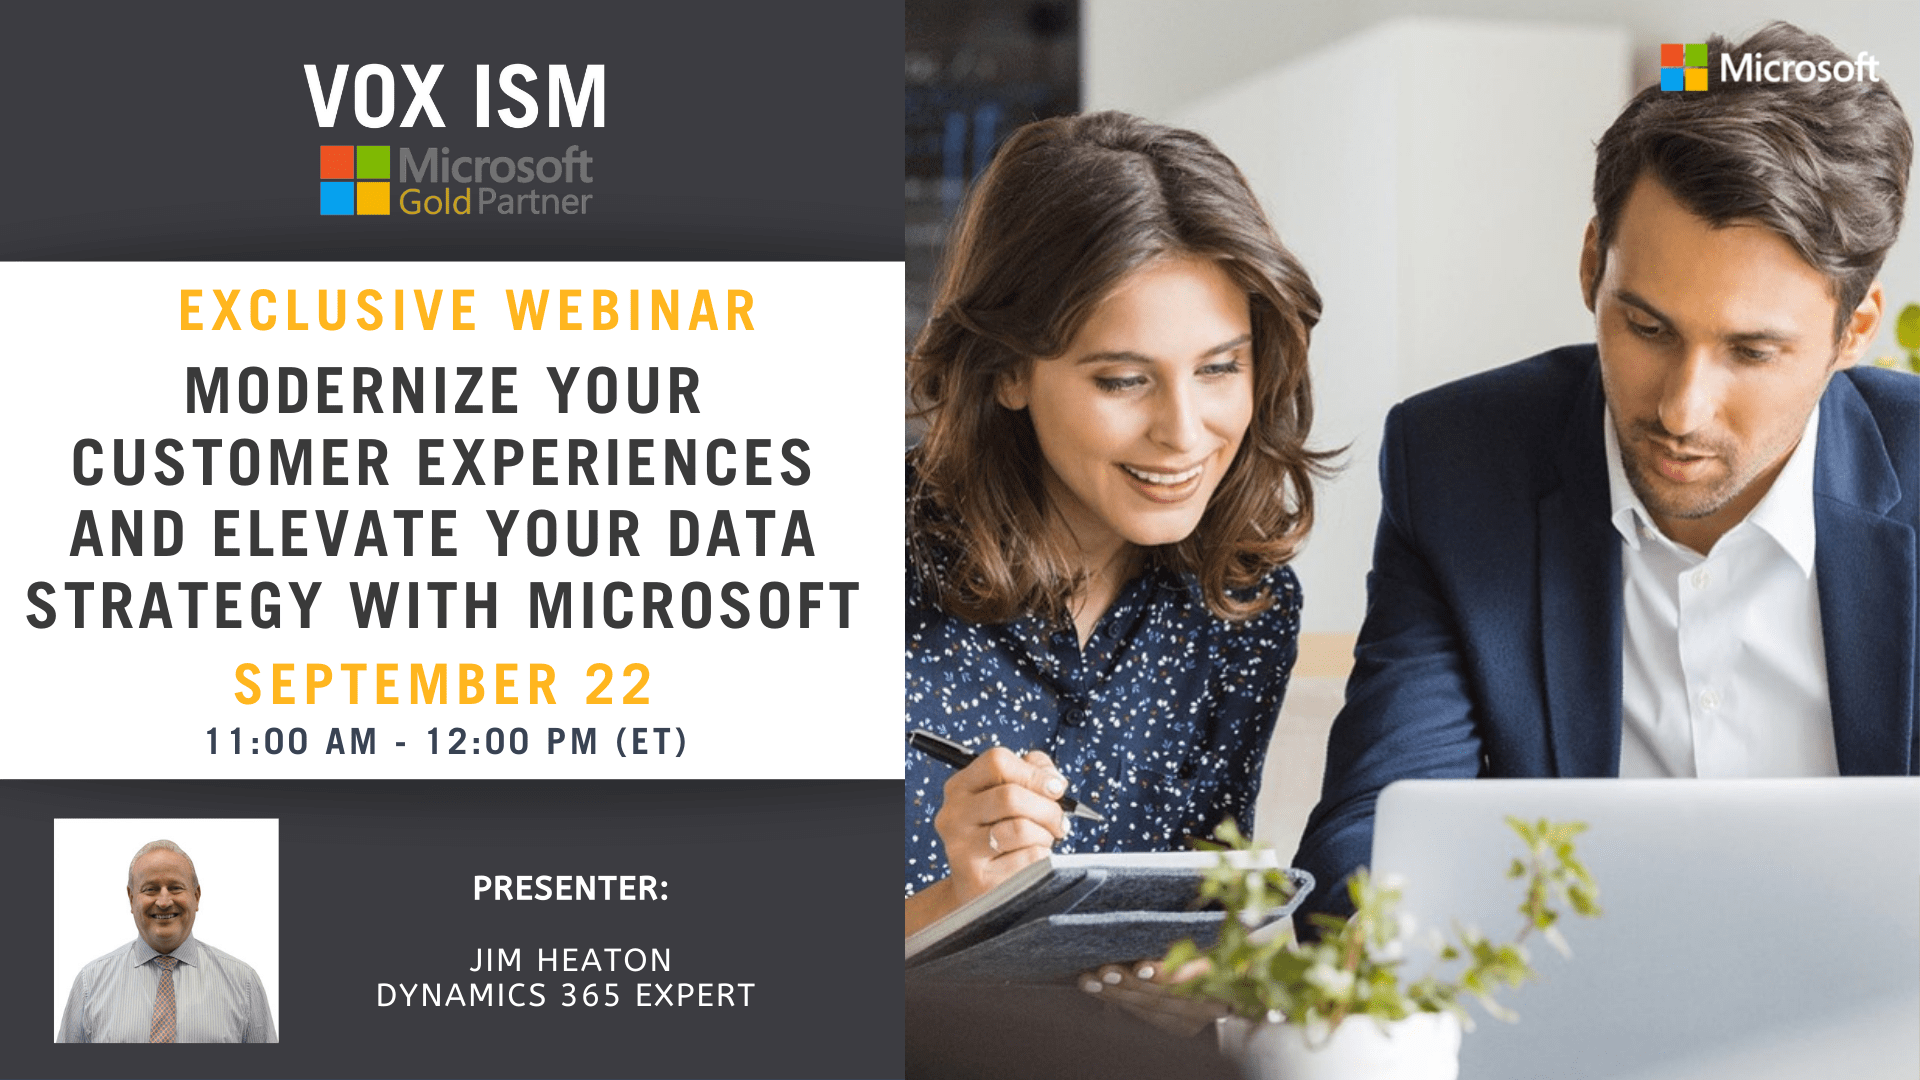 Modernize Your Customer Experiences and Elevate Your Data Strategy - September 22 - Webinar - VOX ISM